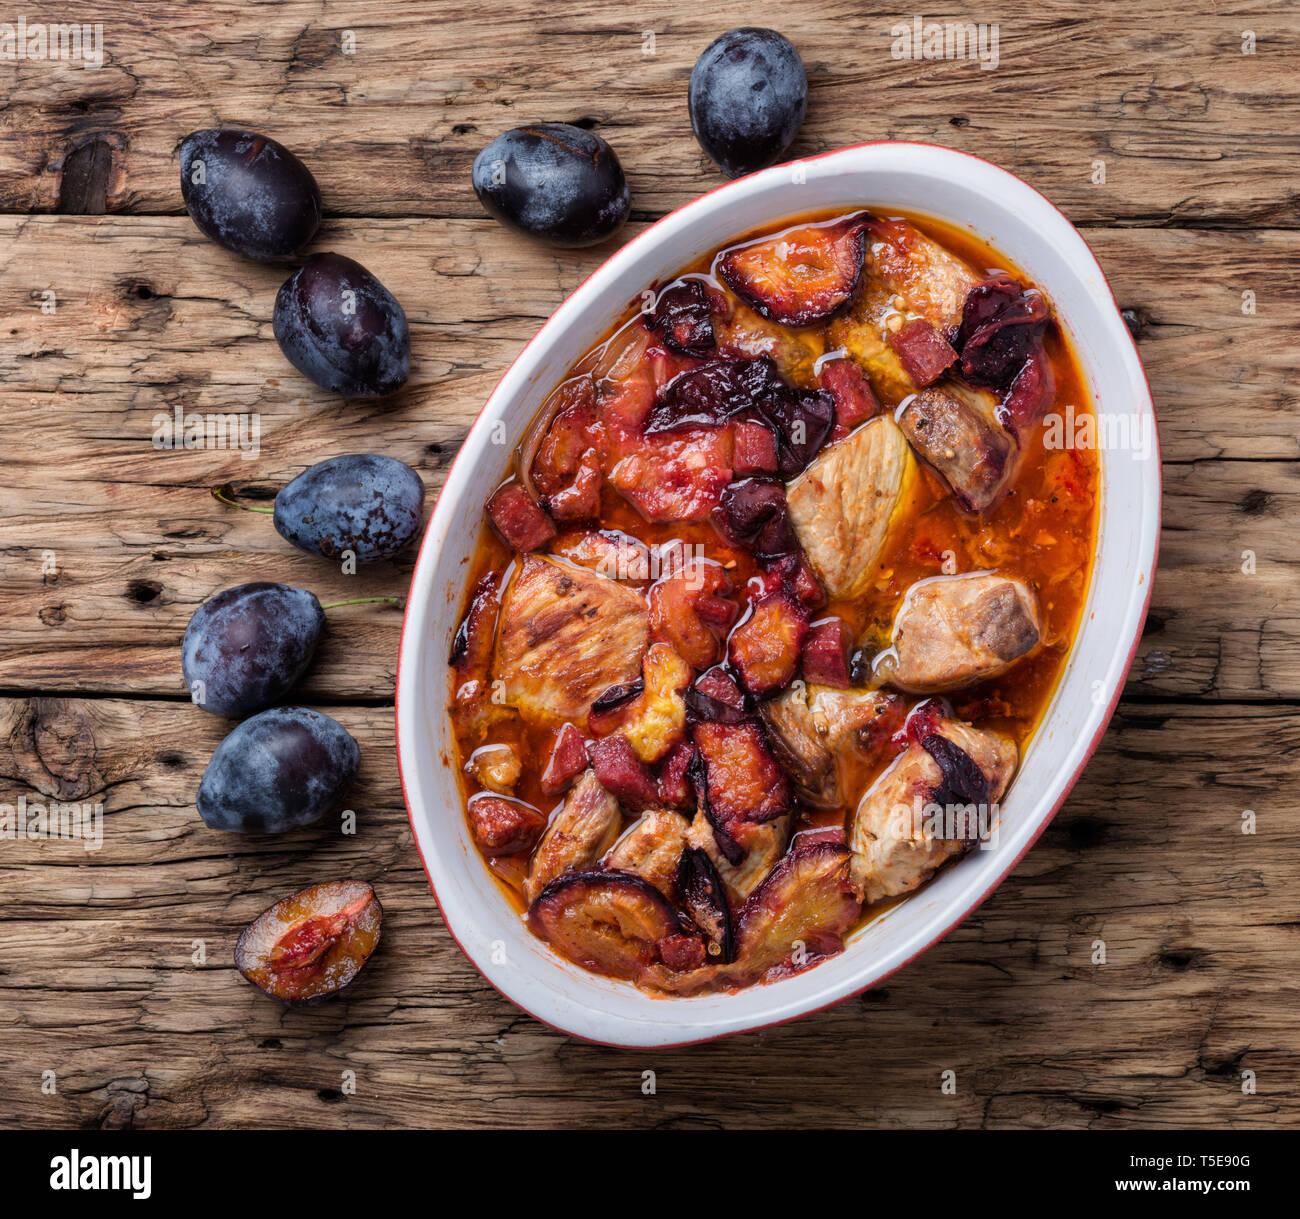 Meat stew with plums on rustic wooden background Stock Photo